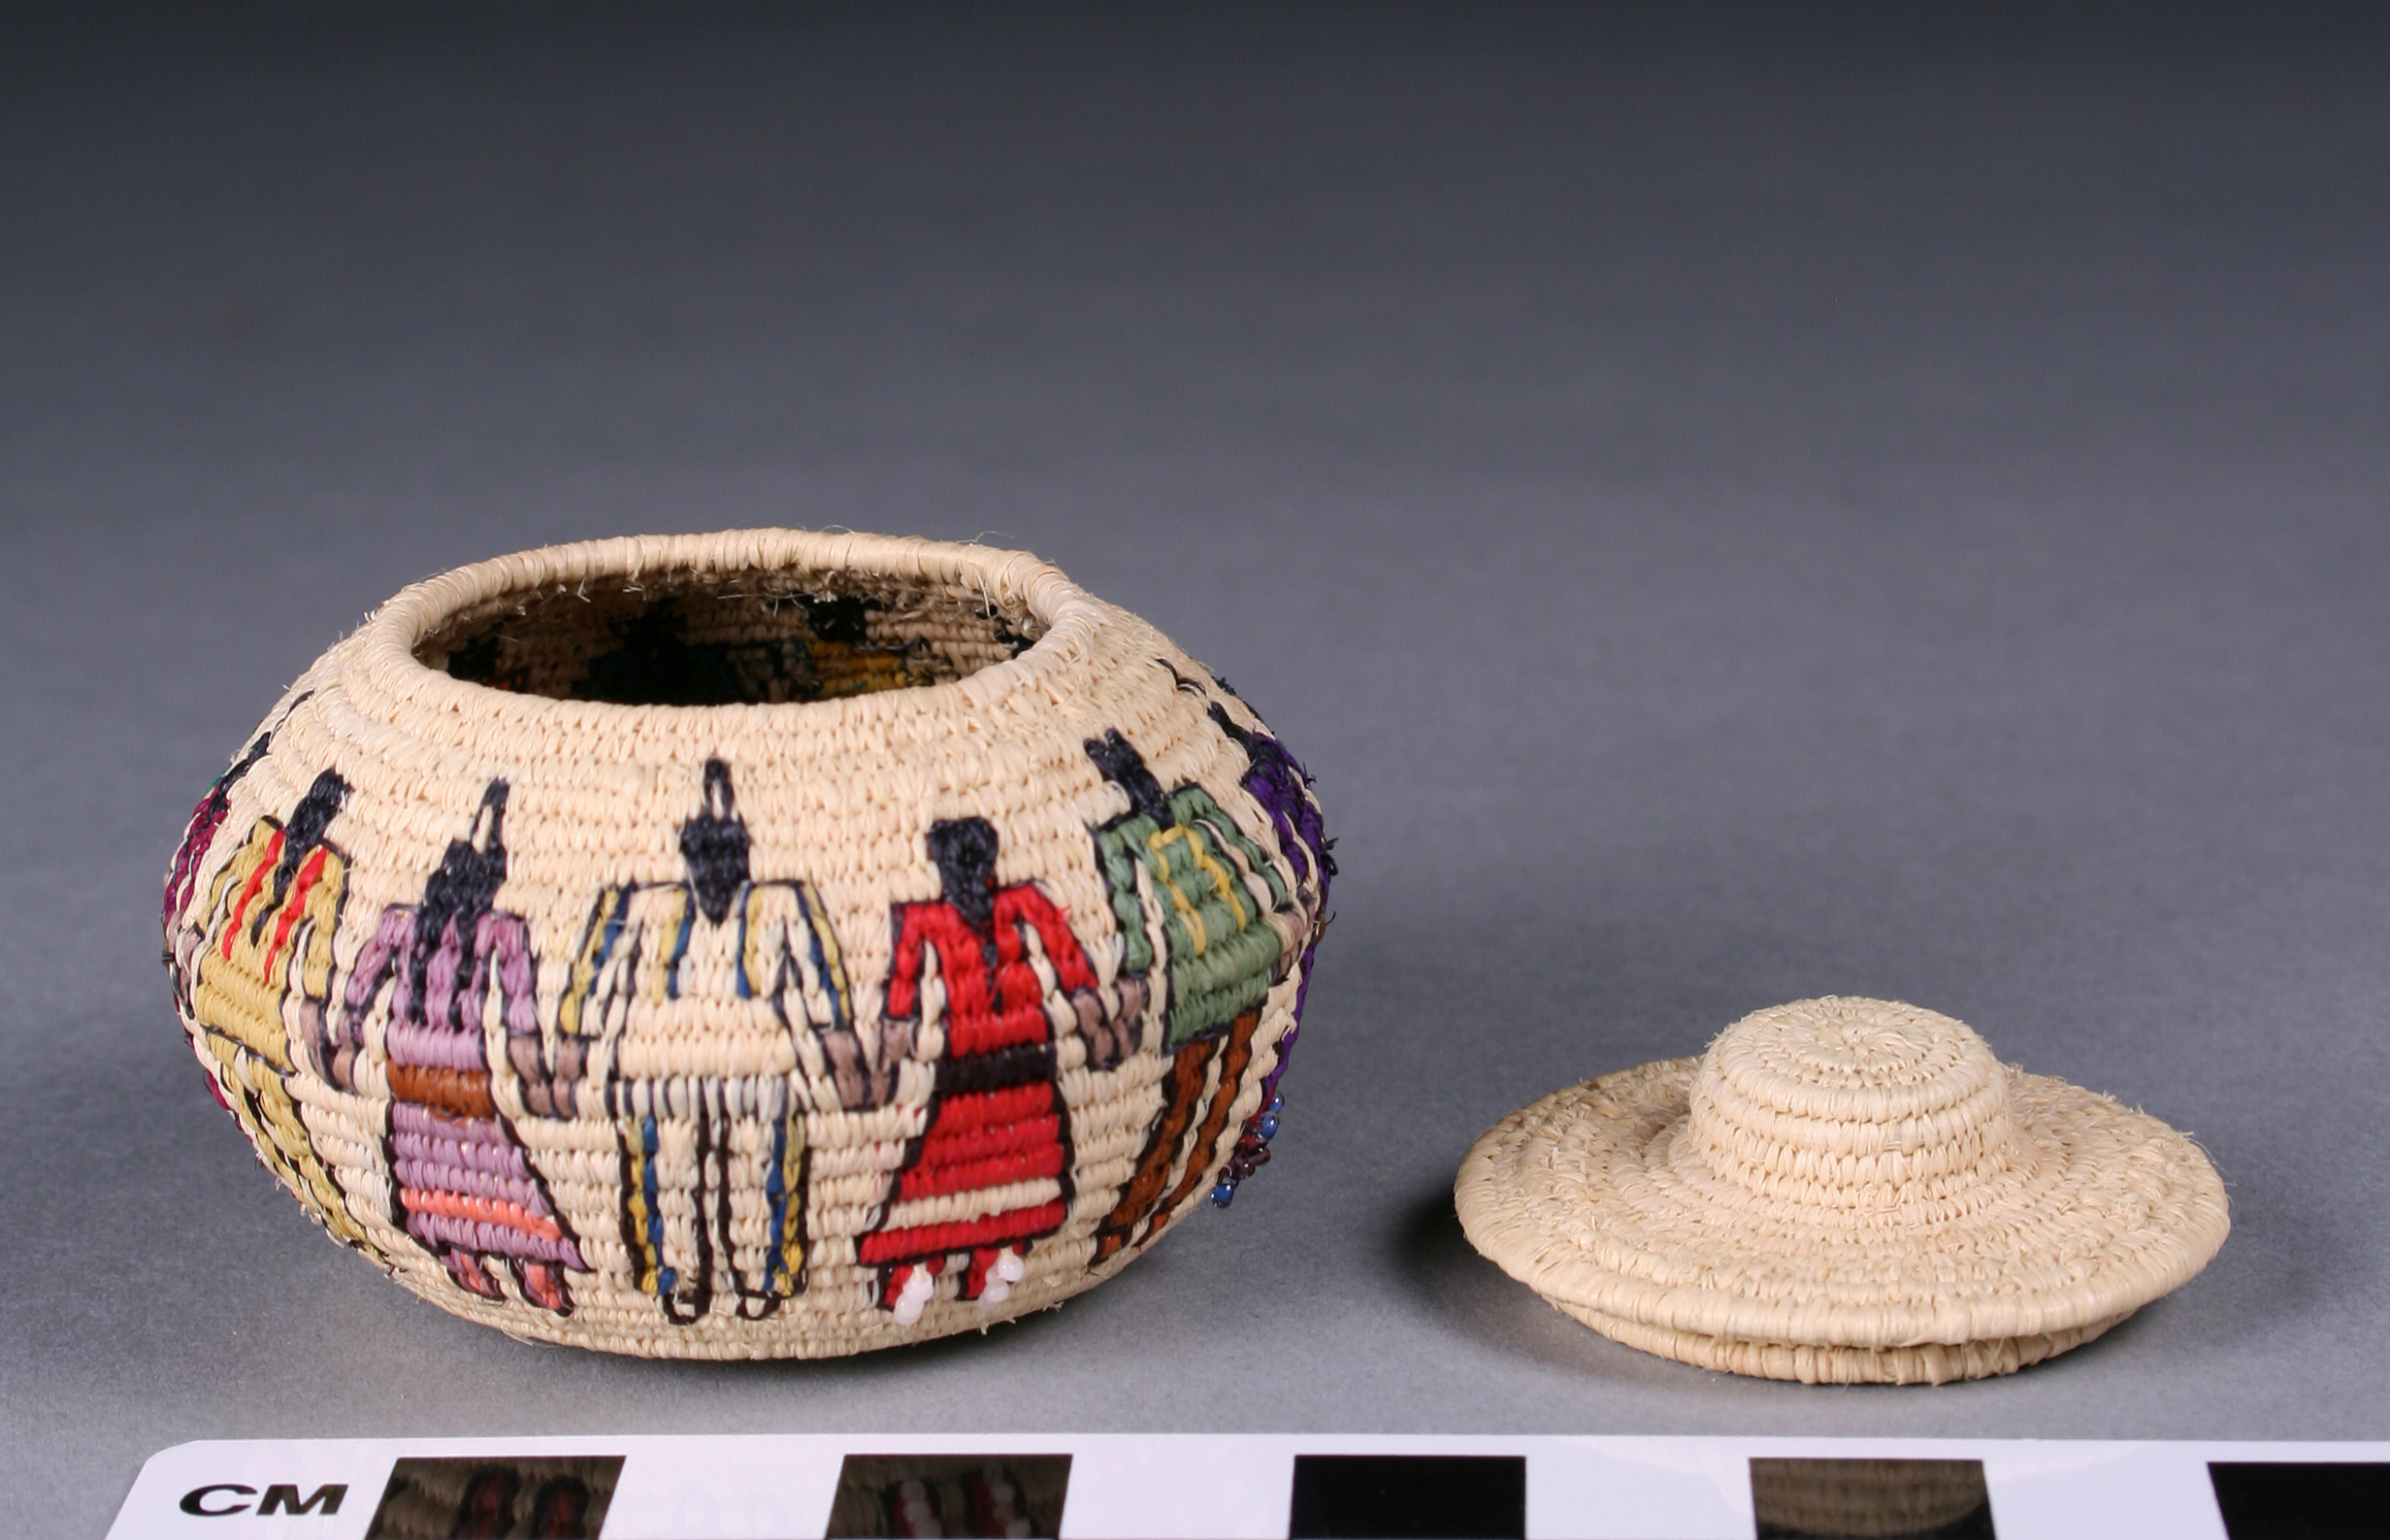 In the Vault: Miniature Basket Illustrates the Big Impact of Tiny Things